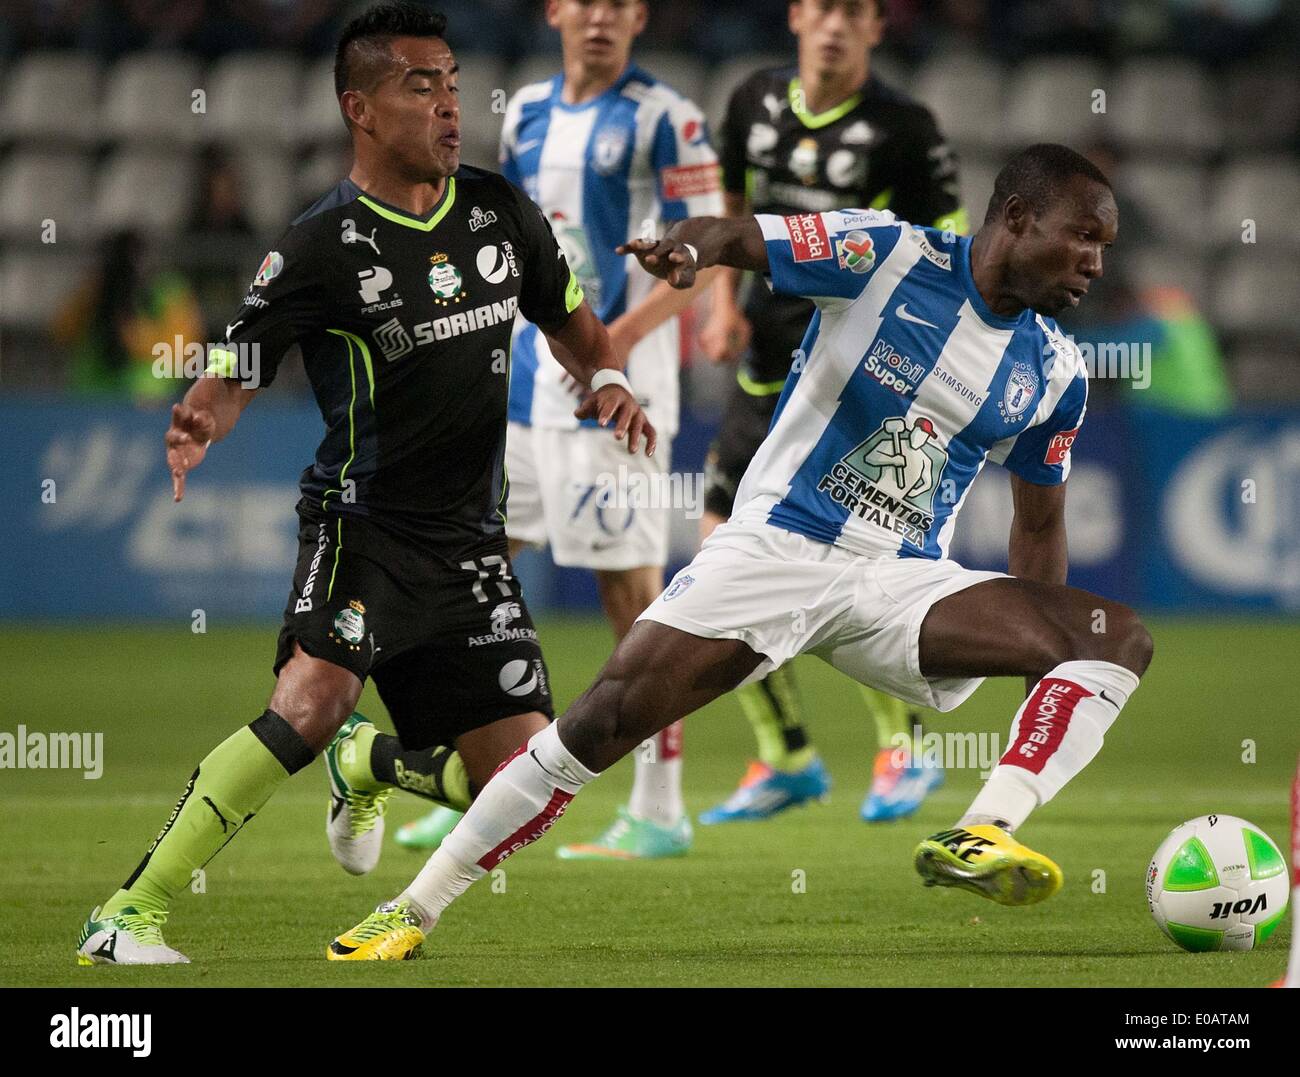 Pachuca, Mexico. 7th May, 2014. Pachuca's Walter Ayovi (R) vies for the ball with Santos' Rodolfo Salinas (L), during their first leg semifinal match of the Liga MX Closing Tournament at Hidalgo Stadium, in Pachuca, Hidalgo, Mexico, on May 7, 2014. © Pedro Mera/Xinhua/Alamy Live News Stock Photo